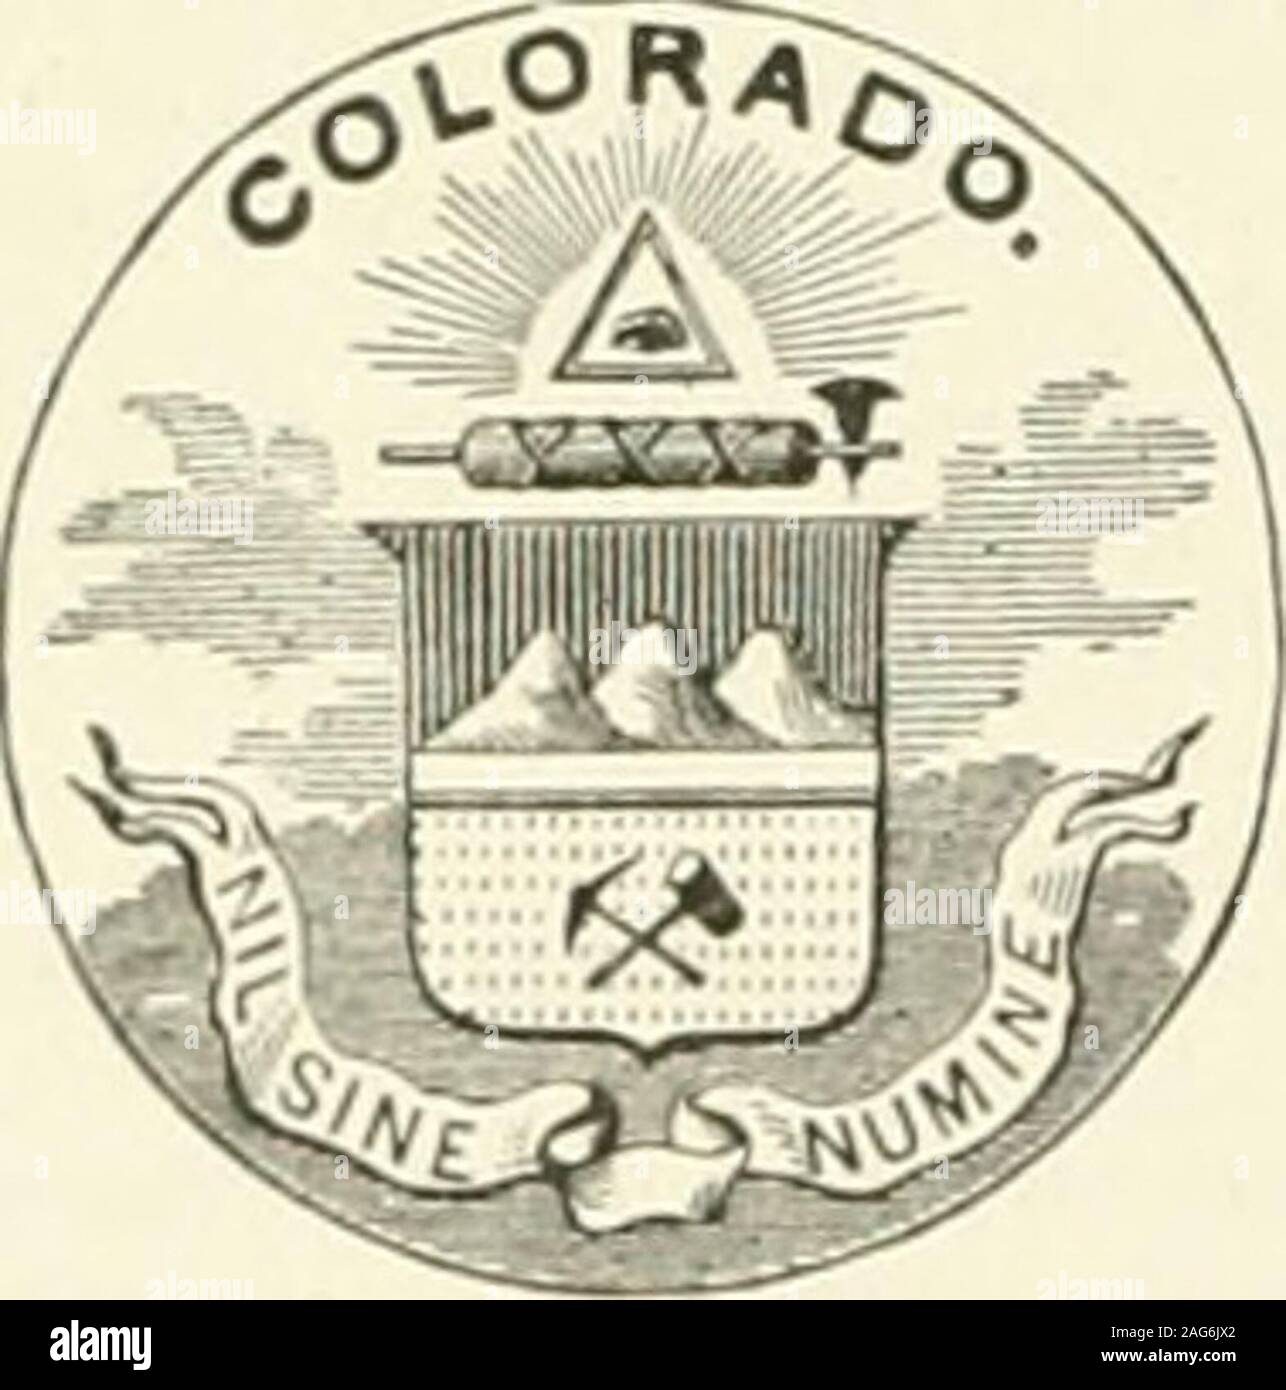 . The American encyclopædia of commerce, manufactures, commercial law, and finance. tively as the North, the Middle, theSouth, and the San Luis; the last is by far thefinest of the four. They stretch almost in a linefrom the S. to the N. boundary of the State, juston the W. side of the Front Range, and occupyan average breadth of 50 m. The San Luis Parkis, as it were, an inniiense elliptical bowl, withan area of 9,400 sq. ni., bounded E. by the WestMountains and the Sangre de Cristo range, amiW. by the Sierra de San Juan, which is part ofthe great Sierra Miembres. Its surface is nearlyas flat Stock Photo